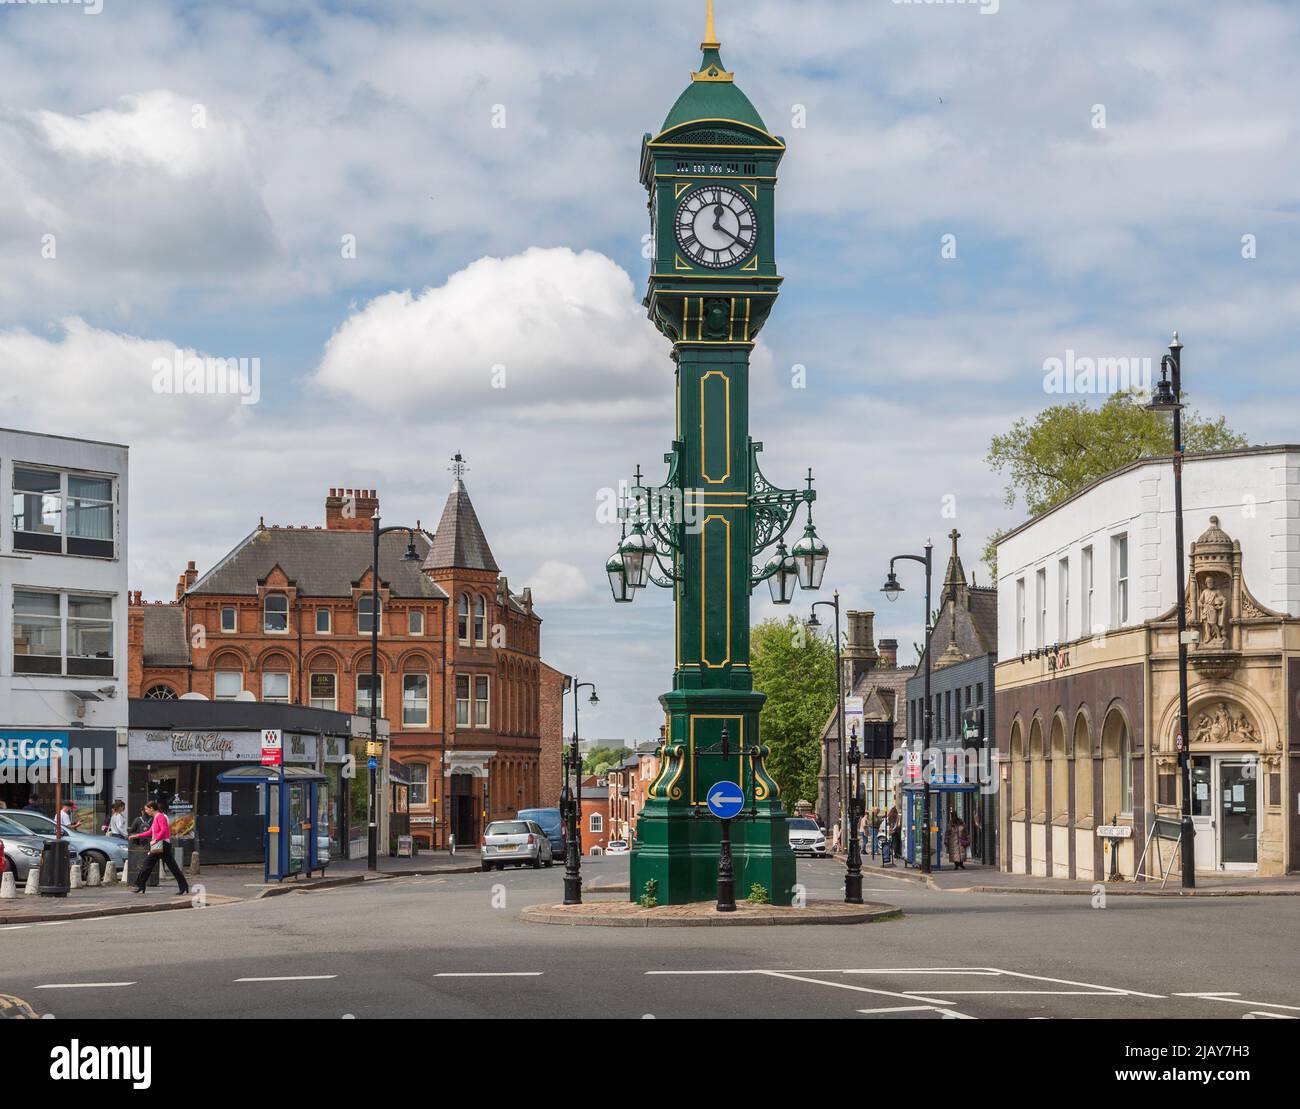 The iconic Chamberlain Clock is an Edwardian, cast-iron, clock tower in the Jewellery Quarter of Birmingham, England. Stock Photo